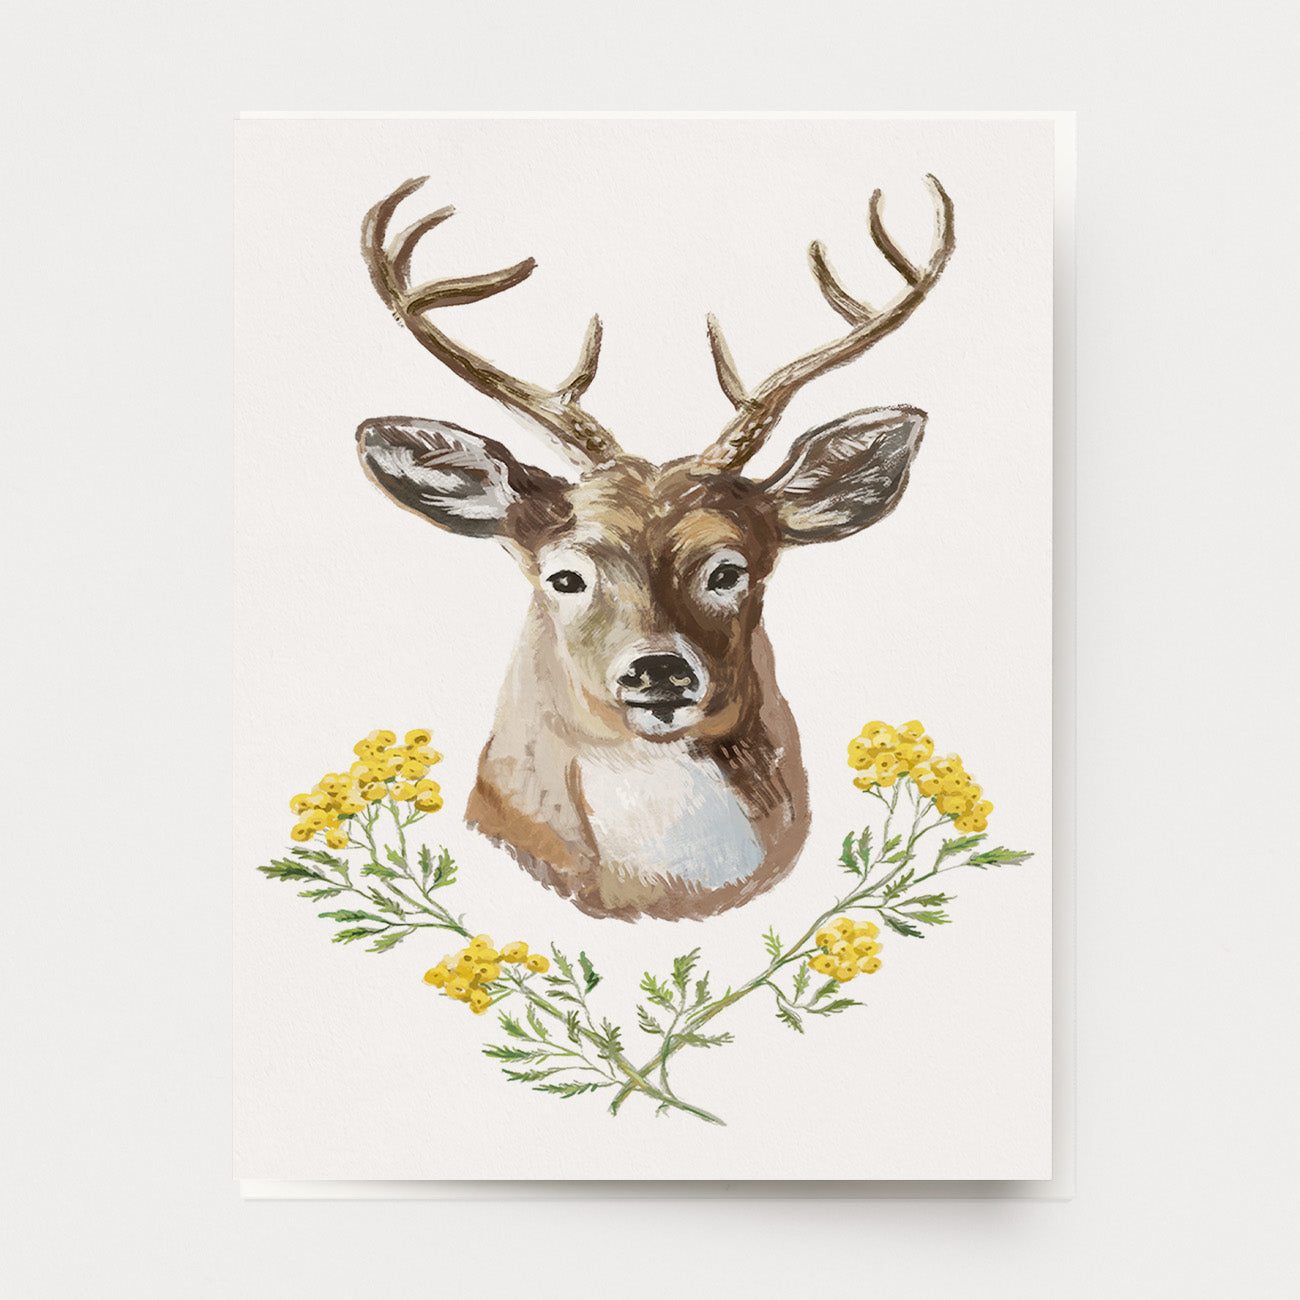  Greeting card of a deer stag portrait with a wreath of flowers. Ingrid Press, made in the USA.